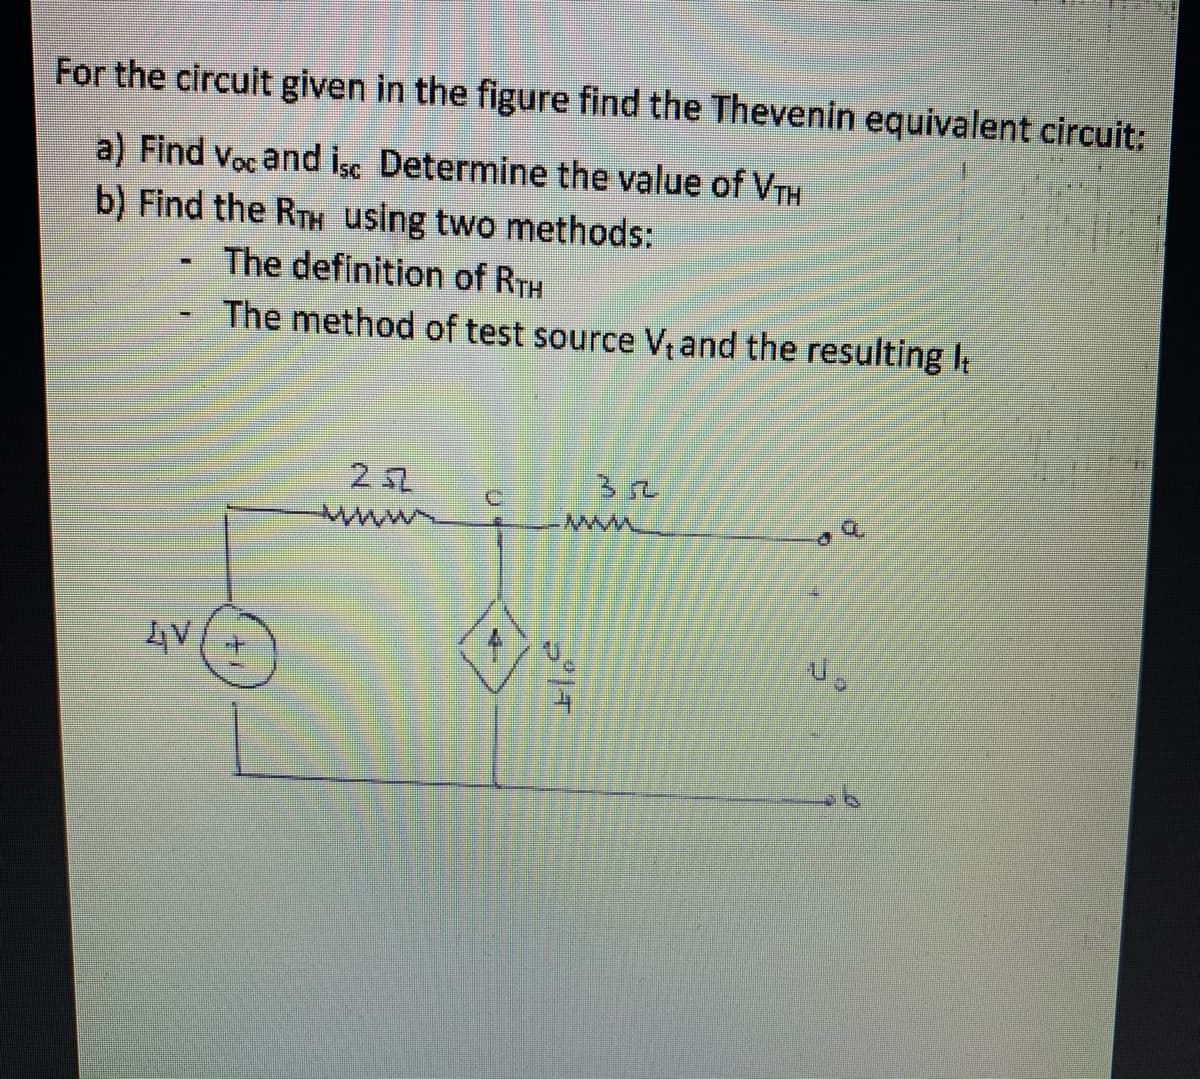 For the circuit given in the figure find the Thevenin equivalent circuit:
a) Find voc and İsc Determine the value of VTH
b) Find the RTH using two methods:
The definition of RTH
The method of test source Vand the resulting I
